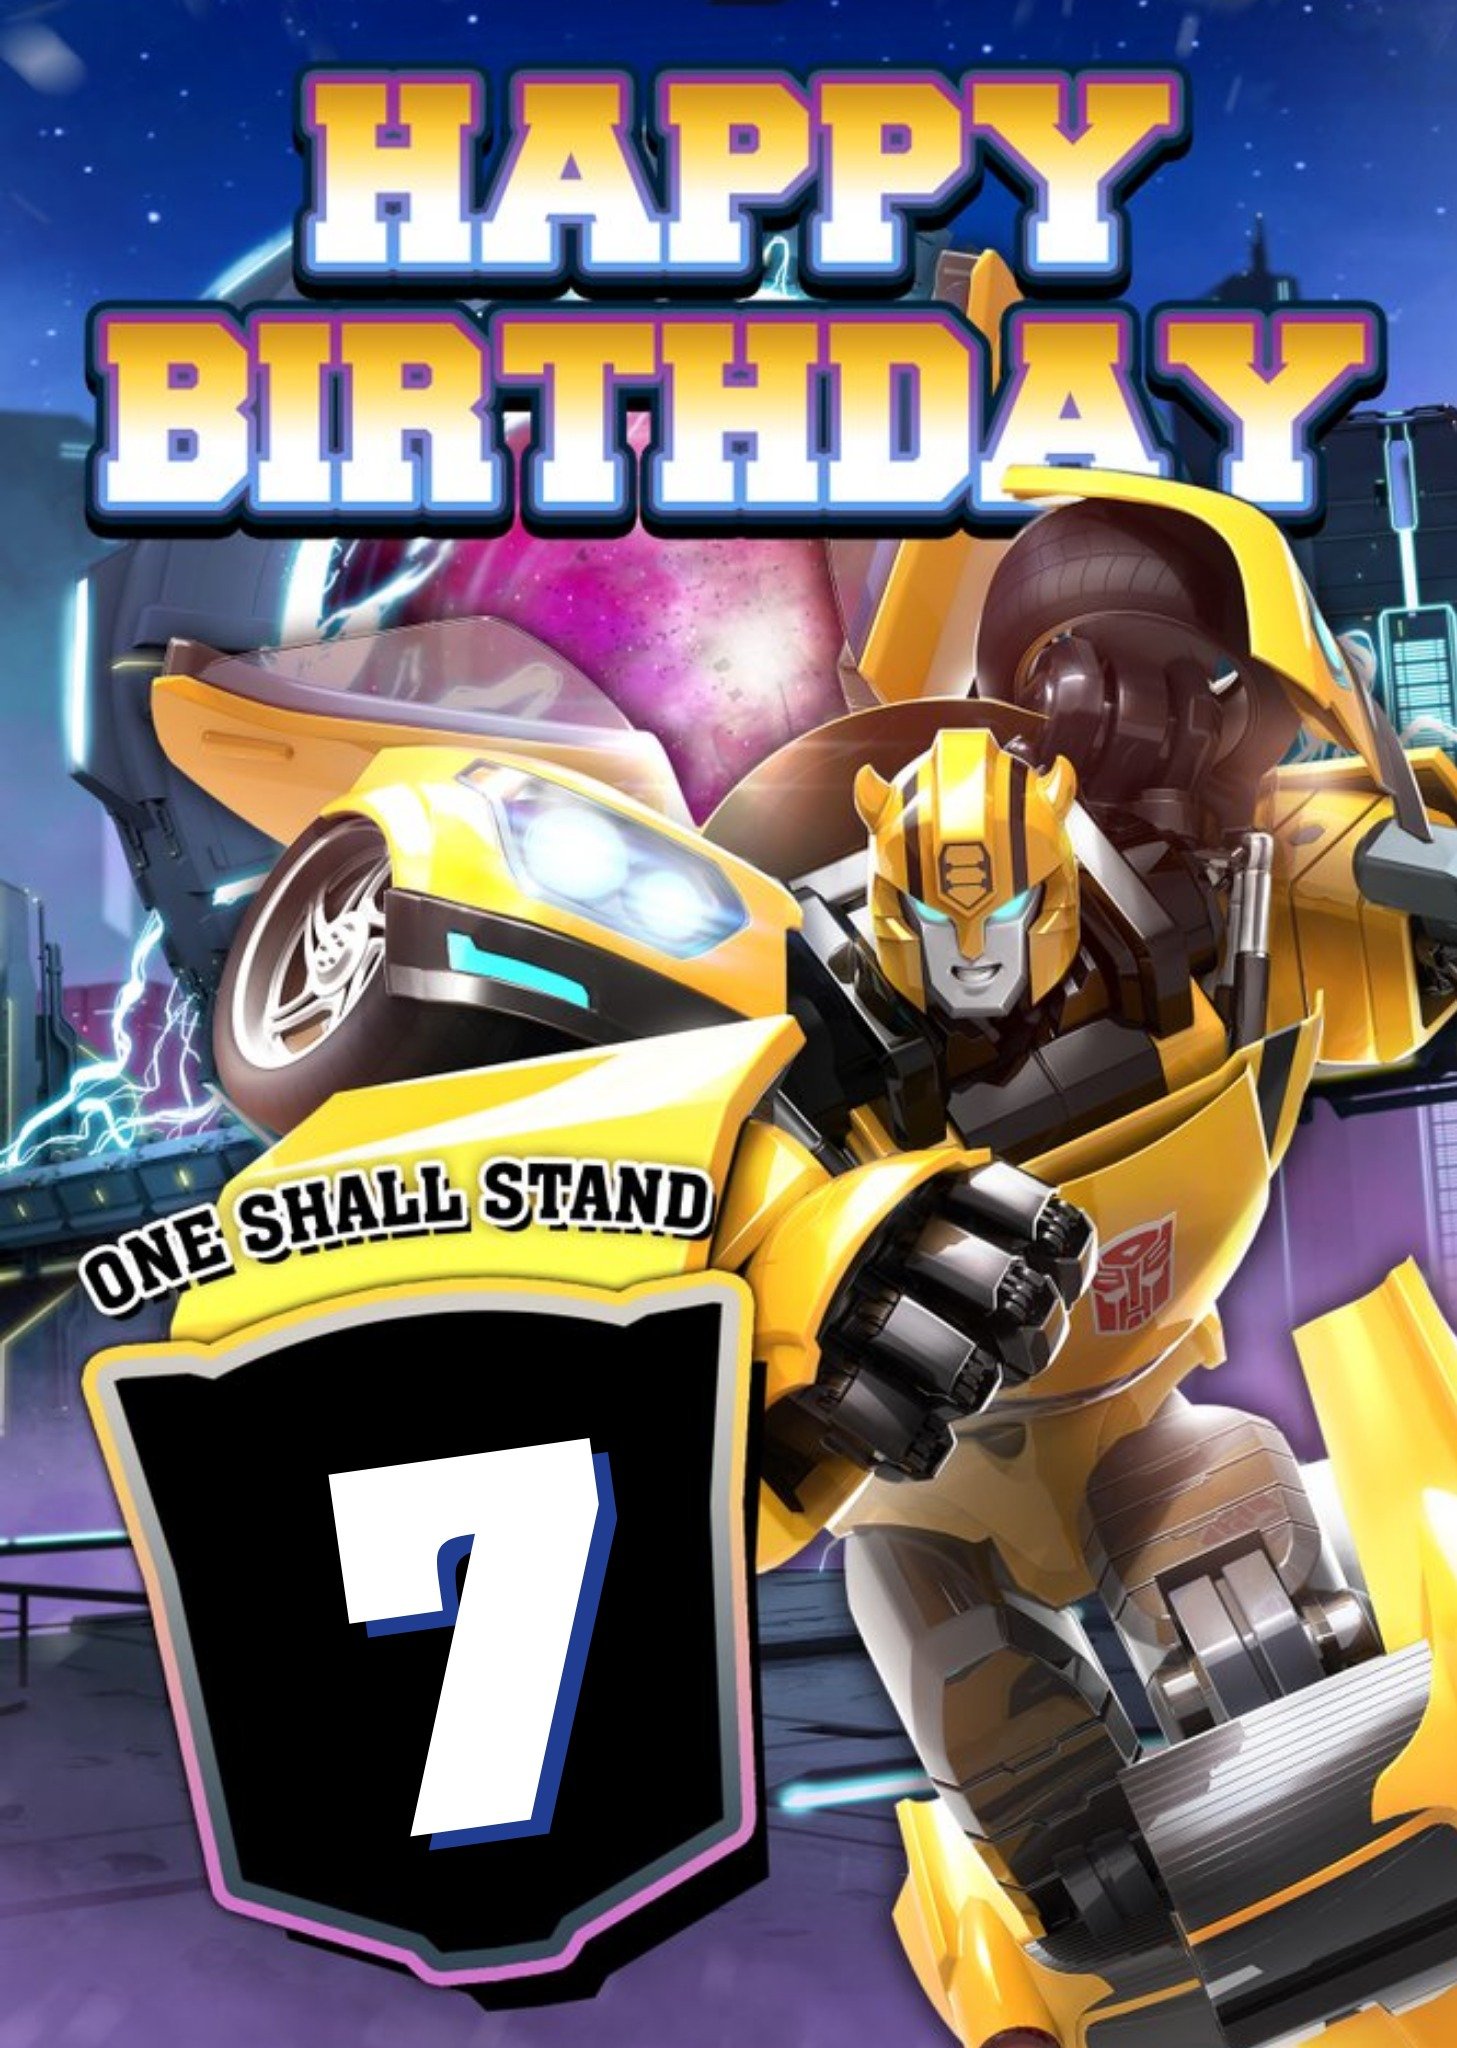 Transformers One Shall Stand Personalised Age Birthday Card, Large